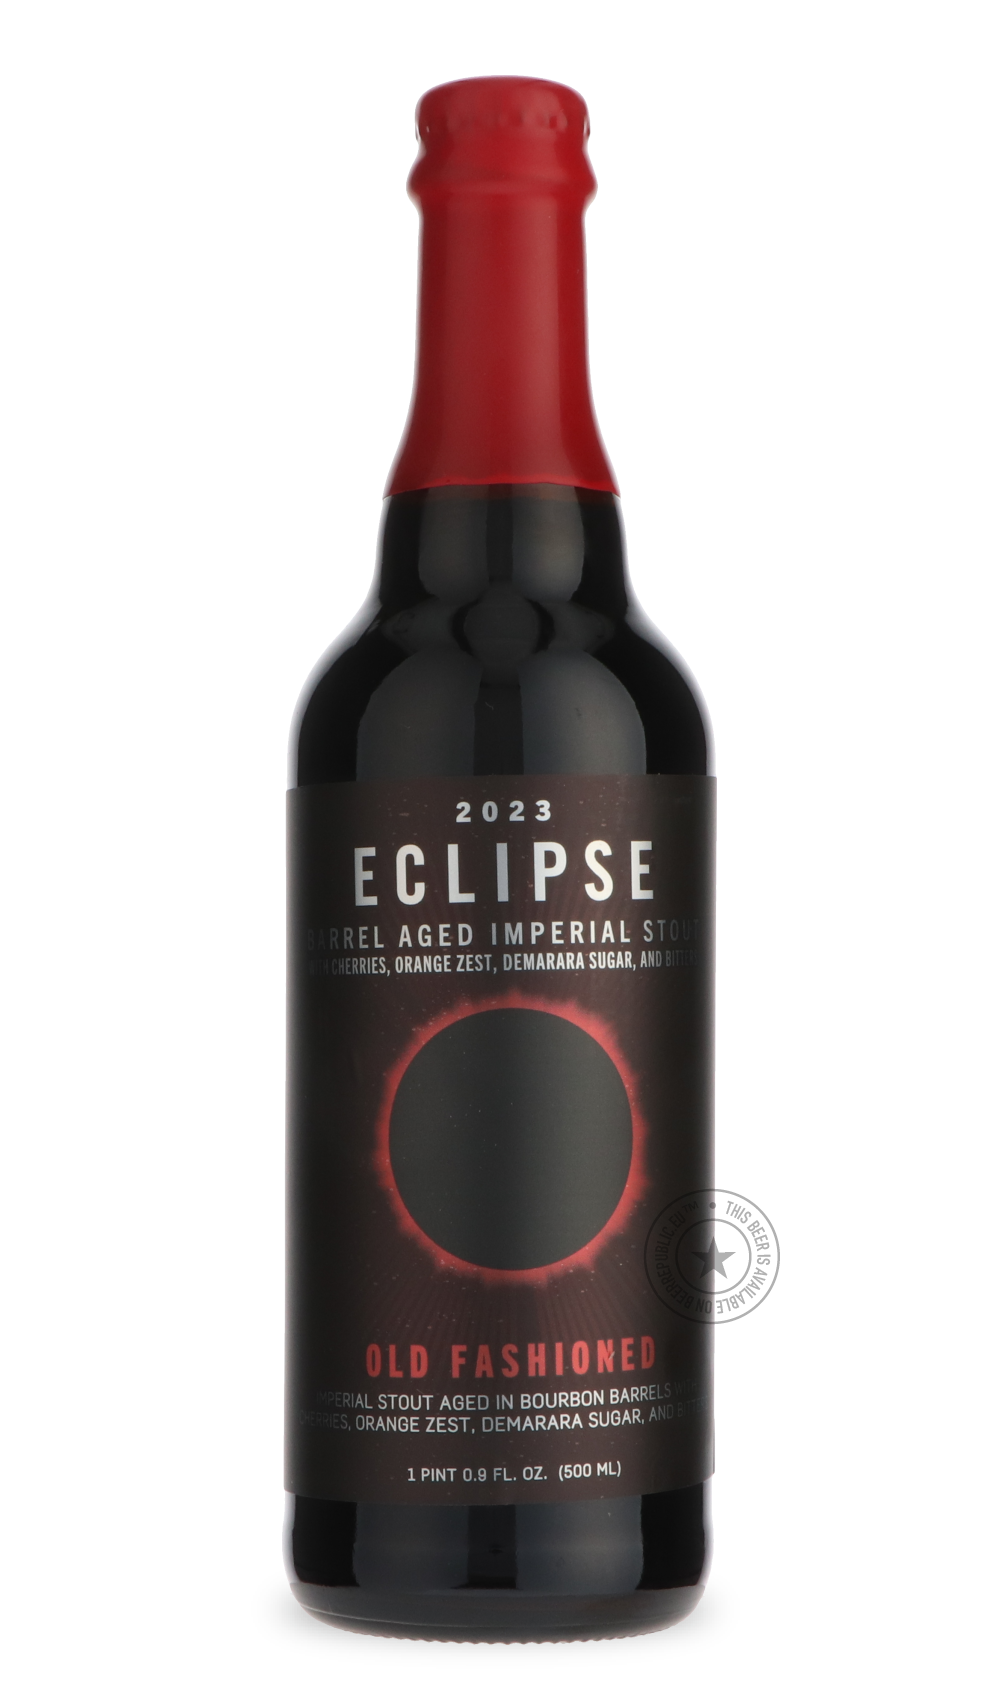 -FiftyFifty- Eclipse - Old Fashioned (2023)-Stout & Porter- Only @ Beer Republic - The best online beer store for American & Canadian craft beer - Buy beer online from the USA and Canada - Bier online kopen - Amerikaans bier kopen - Craft beer store - Craft beer kopen - Amerikanisch bier kaufen - Bier online kaufen - Acheter biere online - IPA - Stout - Porter - New England IPA - Hazy IPA - Imperial Stout - Barrel Aged - Barrel Aged Imperial Stout - Brown - Dark beer - Blond - Blonde - Pilsner - Lager - Whe